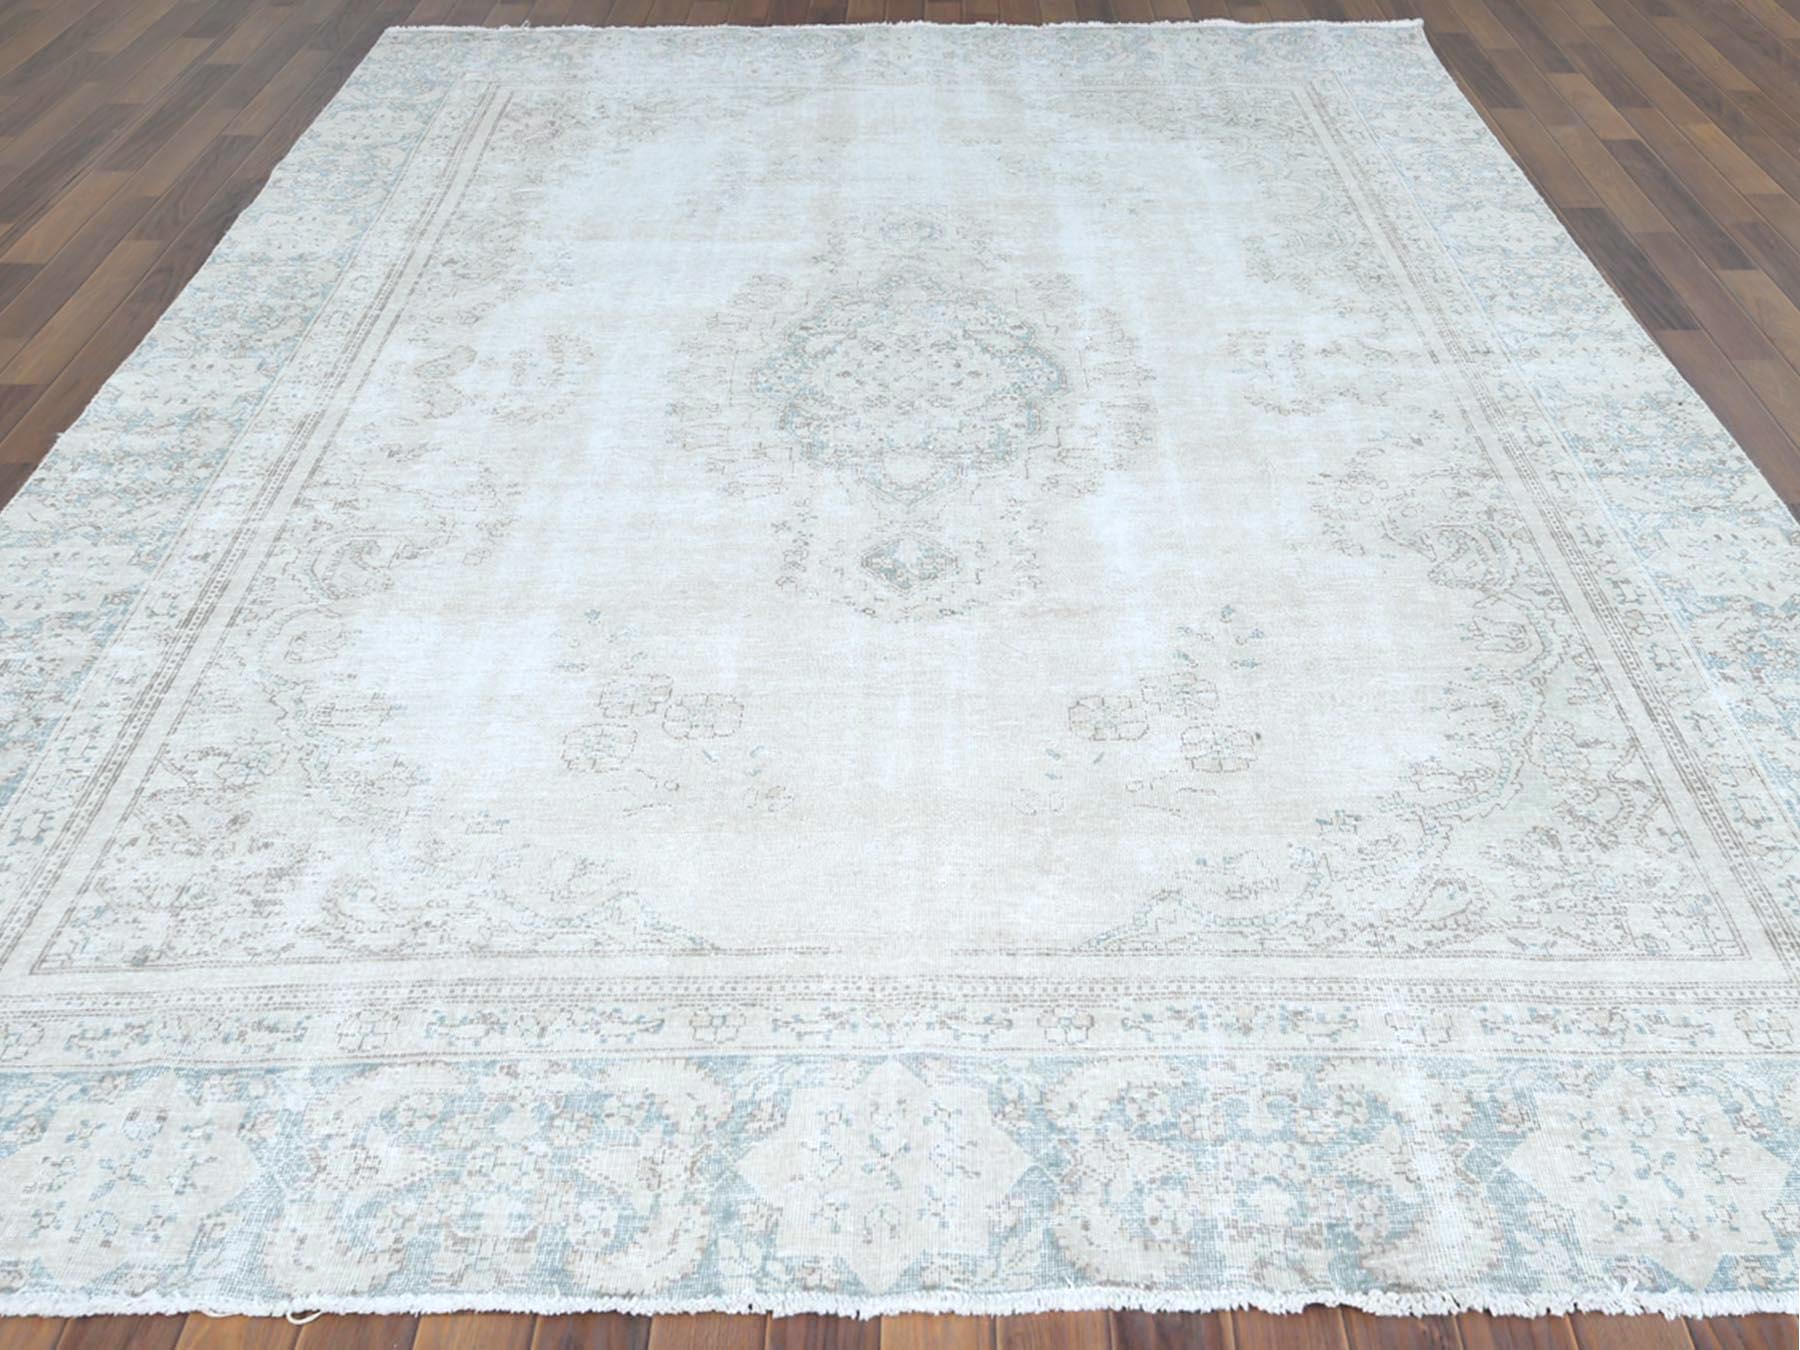 Overdyed & Vintage Rugs LUV556110